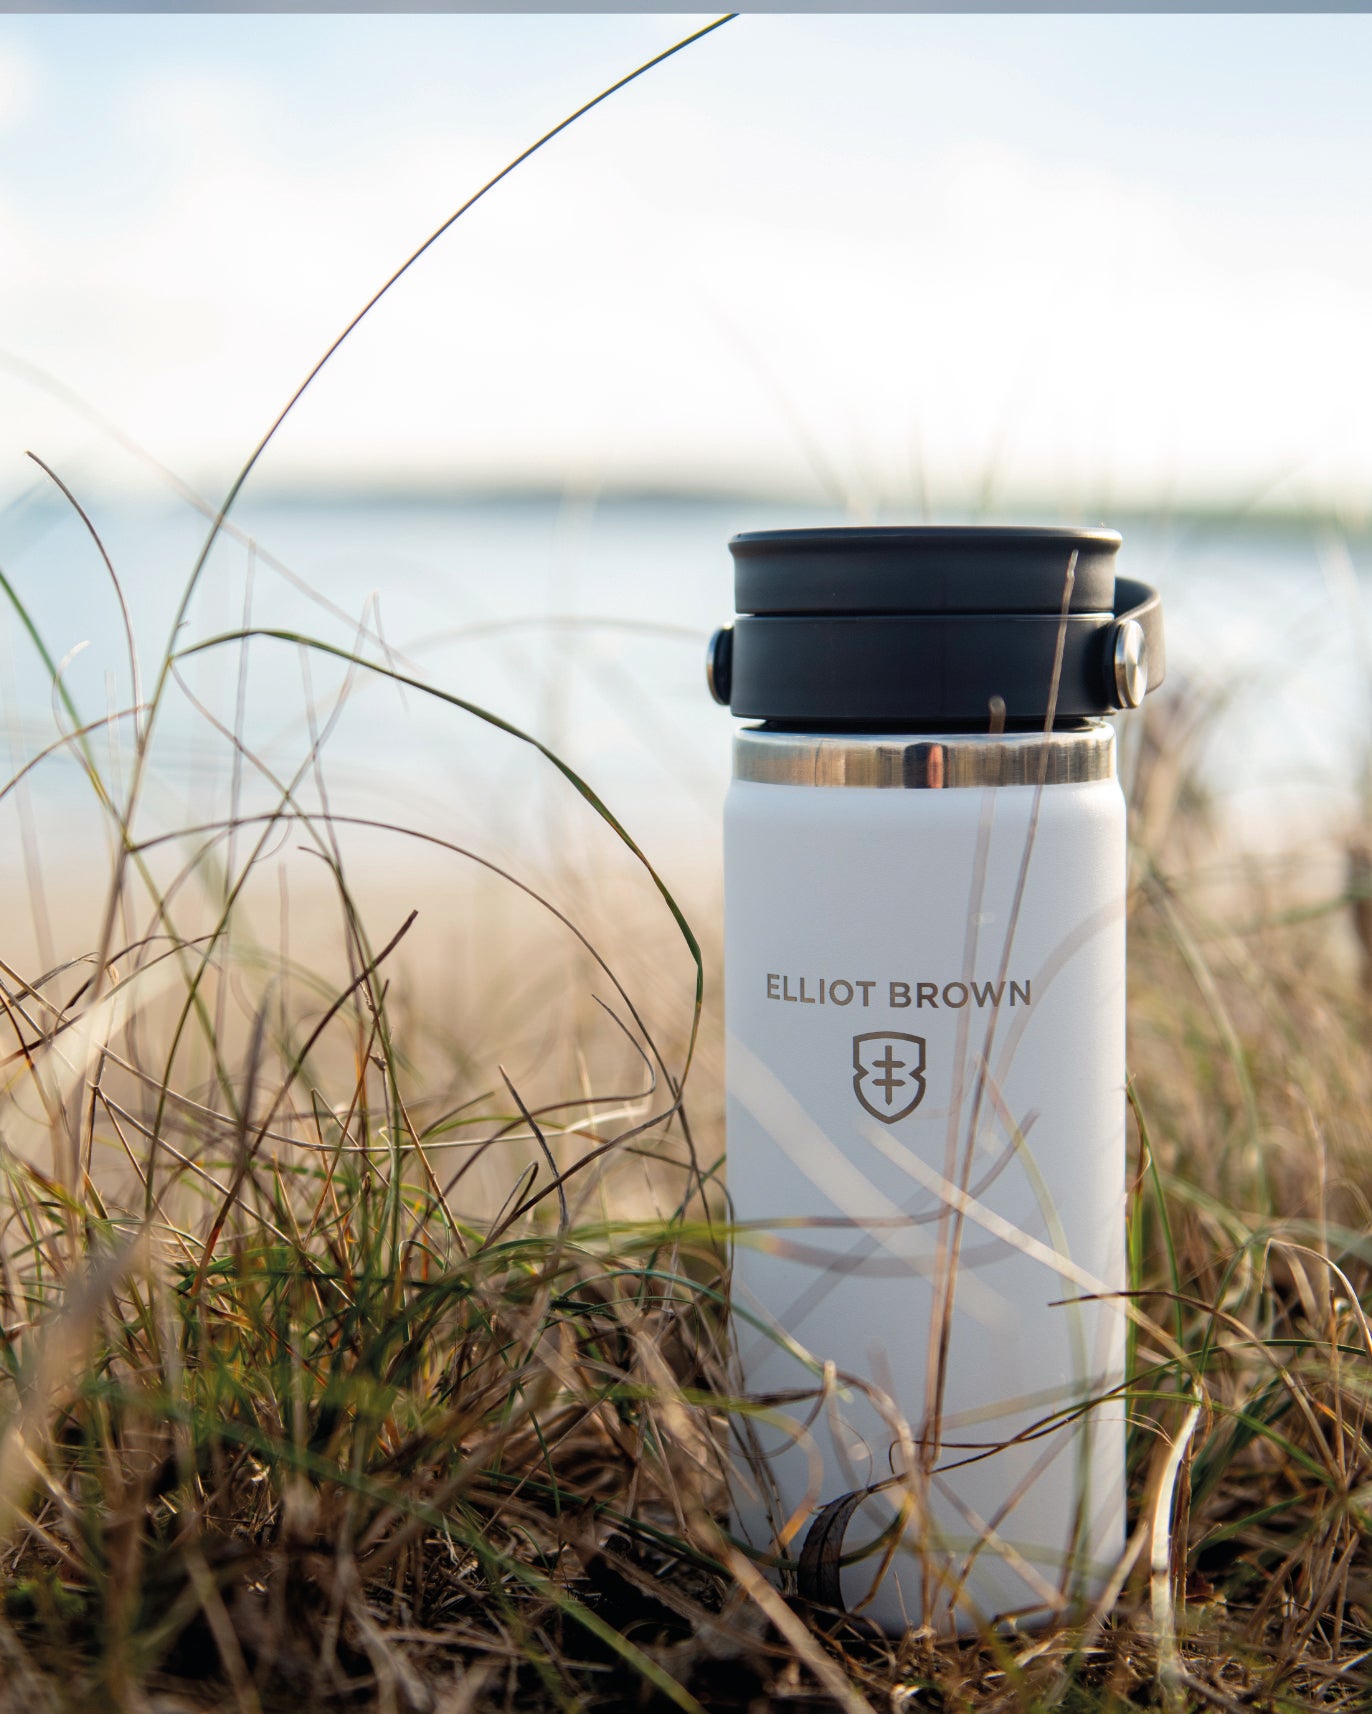 How does a Hydro Flask keep water cold? - Southern Man